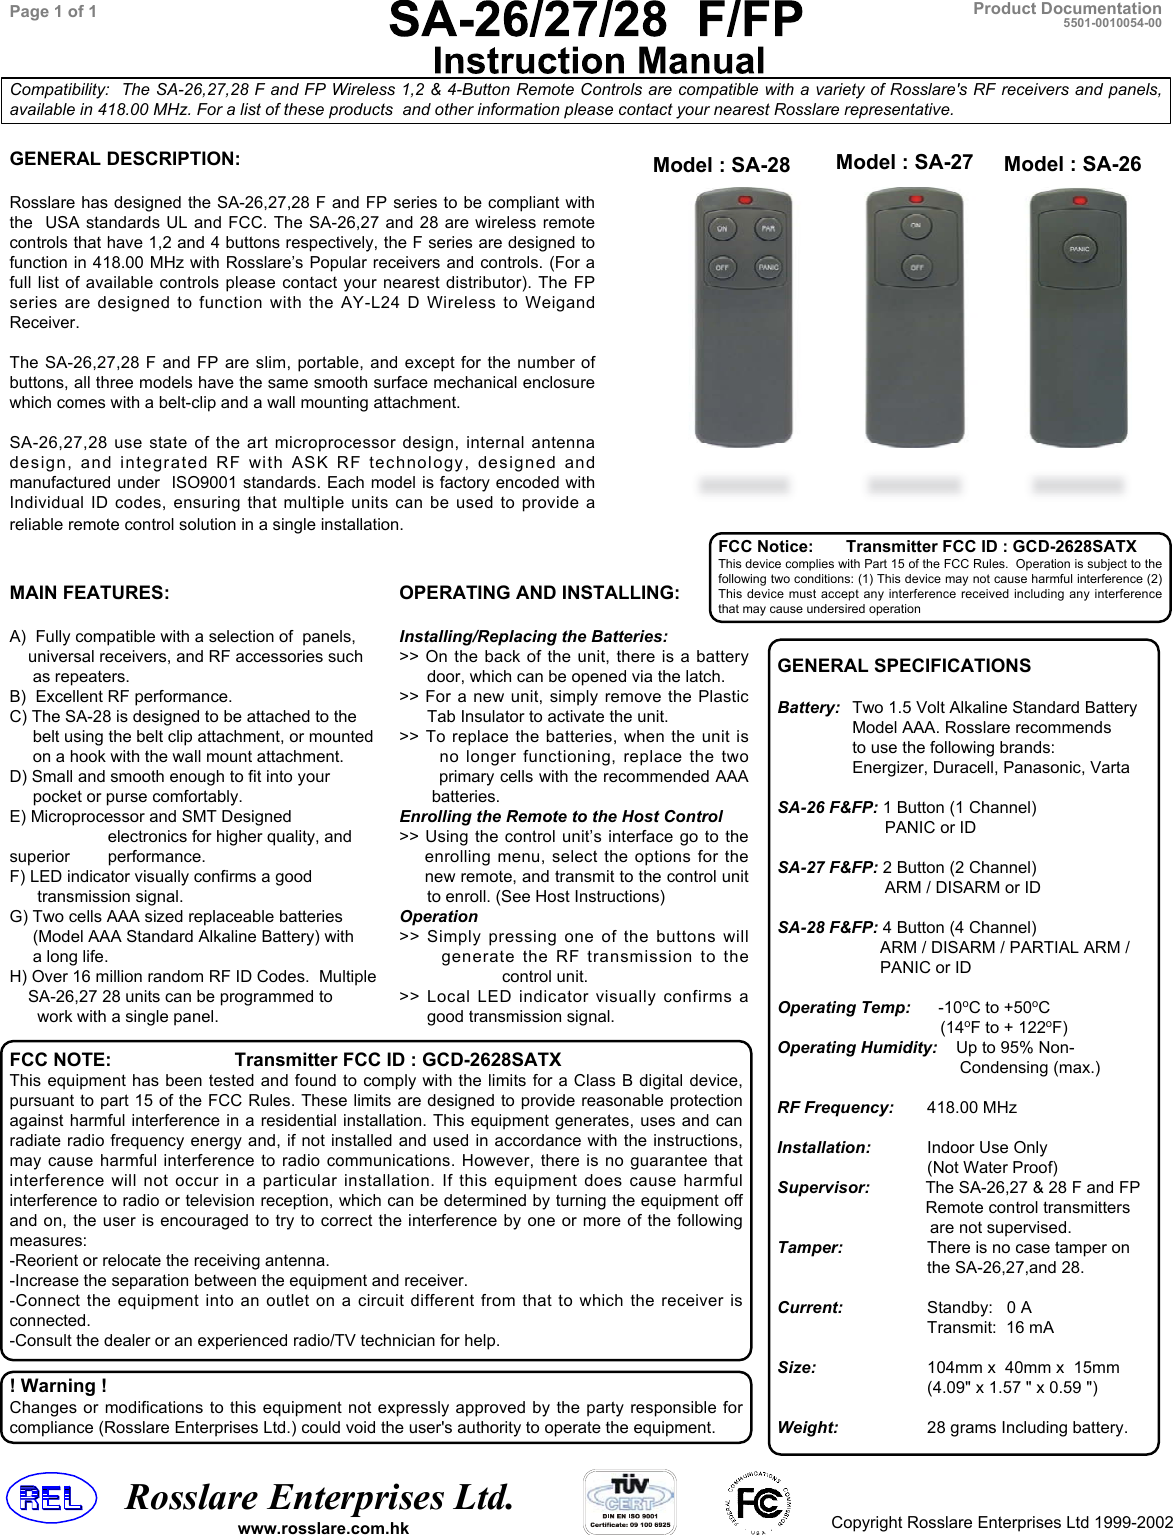    Rosslare Enterprises Ltd.Copyright Rosslare Enterprises Ltd 1999-2002Product DocumentationCompatibility:  The SA-26,27,28 F and FP Wireless 1,2 &amp; 4-Button Remote Controls are compatible with a variety of Rosslare&apos;s RF receivers and panels,available in 418.00 MHz. For a list of these products  and other information please contact your nearest Rosslare representative.Page 1 of 1 5501-0010054-00MAIN FEATURES:A)  Fully compatible with a selection of  panels,    universal receivers, and RF accessories such     as repeaters.B)  Excellent RF performance.C) The SA-28 is designed to be attached to the     belt using the belt clip attachment, or mounted     on a hook with the wall mount attachment.D) Small and smooth enough to fit into your     pocket or purse comfortably.E) Microprocessor and SMT Designed     electronics for higher quality, andsuperior      performance.F) LED indicator visually confirms a good      transmission signal.G) Two cells AAA sized replaceable batteries     (Model AAA Standard Alkaline Battery) with     a long life.H) Over 16 million random RF ID Codes.  Multiple    SA-26,27 28 units can be programmed to      work with a single panel.GENERAL SPECIFICATIONSBattery: Two 1.5 Volt Alkaline Standard BatteryModel AAA. Rosslare recommendsto use the following brands:Energizer, Duracell, Panasonic, VartaSA-26 F&amp;FP: 1 Button (1 Channel)       PANIC or IDSA-27 F&amp;FP: 2 Button (2 Channel)       ARM / DISARM or IDSA-28 F&amp;FP: 4 Button (4 Channel)      ARM / DISARM / PARTIAL ARM /      PANIC or IDOperating Temp:      -10oC to +50oC                   (14oF to + 122oF)Operating Humidity:   Up to 95% Non-       Condensing (max.)RF Frequency: 418.00 MHzInstallation: Indoor Use Only(Not Water Proof)Supervisor:            The SA-26,27 &amp; 28 F and FP                                Remote control transmitters                                 are not supervised.Tamper: There is no case tamper onthe SA-26,27,and 28.Current: Standby:   0 ATransmit:  16 mASize: 104mm x  40mm x  15mm(4.09&quot; x 1.57 &quot; x 0.59 &quot;)Weight:  28 grams Including battery.GENERAL DESCRIPTION:Rosslare has designed the SA-26,27,28 F and FP series to be compliant withthe  USA standards UL and FCC. The SA-26,27 and 28 are wireless remotecontrols that have 1,2 and 4 buttons respectively, the F series are designed tofunction in 418.00 MHz with Rosslare’s Popular receivers and controls. (For afull list of available controls please contact your nearest distributor). The FPseries are designed to function with the AY-L24 D Wireless to WeigandReceiver.The SA-26,27,28 F and FP are slim, portable, and except for the number ofbuttons, all three models have the same smooth surface mechanical enclosurewhich comes with a belt-clip and a wall mounting attachment.SA-26,27,28 use state of the art microprocessor design, internal antennadesign, and integrated RF with ASK RF technology, designed andmanufactured under  ISO9001 standards. Each model is factory encoded withIndividual ID codes, ensuring that multiple units can be used to provide areliable remote control solution in a single installation.Model : SA-26Model : SA-27Model : SA-28www.rosslare.com.hkFCC NOTE: Transmitter FCC ID : GCD-2628SATXThis equipment has been tested and found to comply with the limits for a Class B digital device,pursuant to part 15 of the FCC Rules. These limits are designed to provide reasonable protectionagainst harmful interference in a residential installation. This equipment generates, uses and canradiate radio frequency energy and, if not installed and used in accordance with the instructions,may cause harmful interference to radio communications. However, there is no guarantee thatinterference will not occur in a particular installation. If this equipment does cause harmfulinterference to radio or television reception, which can be determined by turning the equipment offand on, the user is encouraged to try to correct the interference by one or more of the followingmeasures:-Reorient or relocate the receiving antenna.-Increase the separation between the equipment and receiver.-Connect the equipment into an outlet on a circuit different from that to which the receiver isconnected.-Consult the dealer or an experienced radio/TV technician for help.! Warning !Changes or modifications to this equipment not expressly approved by the party responsible forcompliance (Rosslare Enterprises Ltd.) could void the user&apos;s authority to operate the equipment.OPERATING AND INSTALLING:Installing/Replacing the Batteries:&gt;&gt; On the back of the unit, there is a battery      door, which can be opened via the latch.&gt;&gt; For a new unit, simply remove the Plastic      Tab Insulator to activate the unit.&gt;&gt; To replace the batteries, when the unit is      no longer functioning, replace the two       primary cells with the recommended AAA       batteries.Enrolling the Remote to the Host Control&gt;&gt; Using the control unit’s interface go to the    enrolling menu, select the options for the     new remote, and transmit to the control unit      to enroll. (See Host Instructions)Operation&gt;&gt; Simply pressing one of the buttons will      generate the RF transmission to the      control unit.&gt;&gt; Local LED indicator visually confirms a      good transmission signal.FCC Notice:       Transmitter FCC ID : GCD-2628SATXThis device complies with Part 15 of the FCC Rules.  Operation is subject to thefollowing two conditions: (1) This device may not cause harmful interference (2)This device must accept any interference received including any interferencethat may cause undersired operation